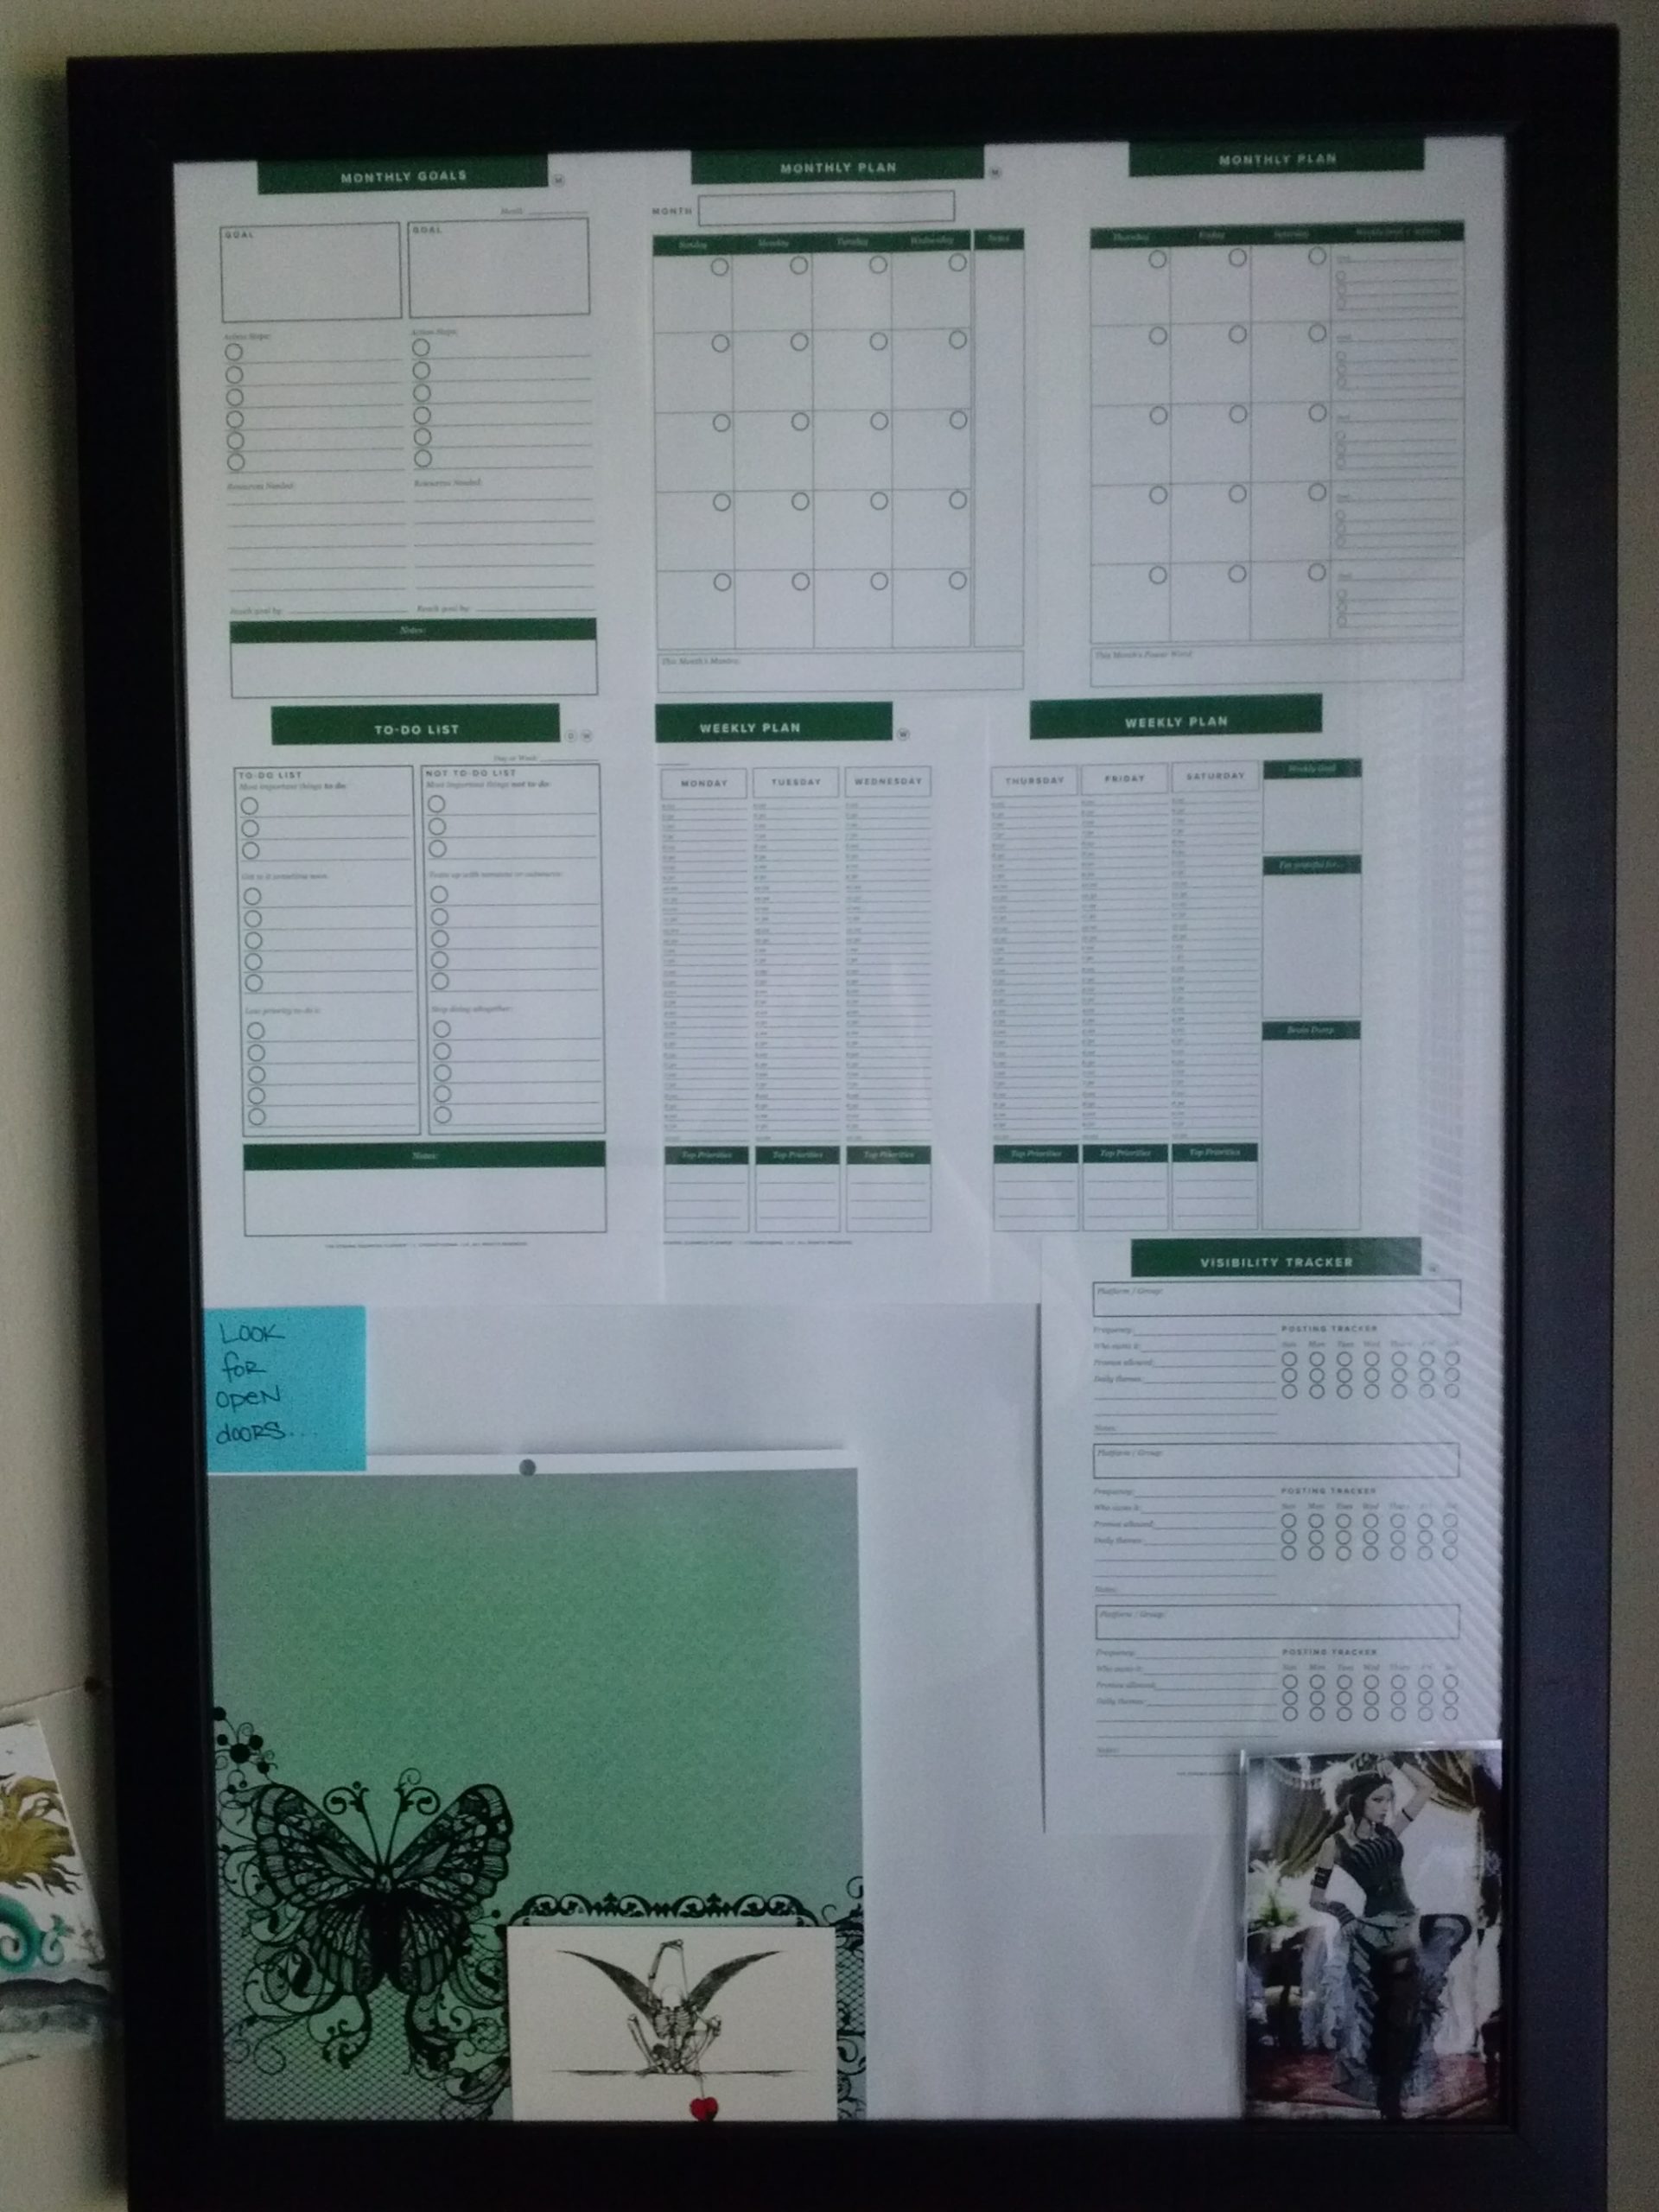 blank calendar for goal planning spread out inside a picture frame and used as a wipe-off board